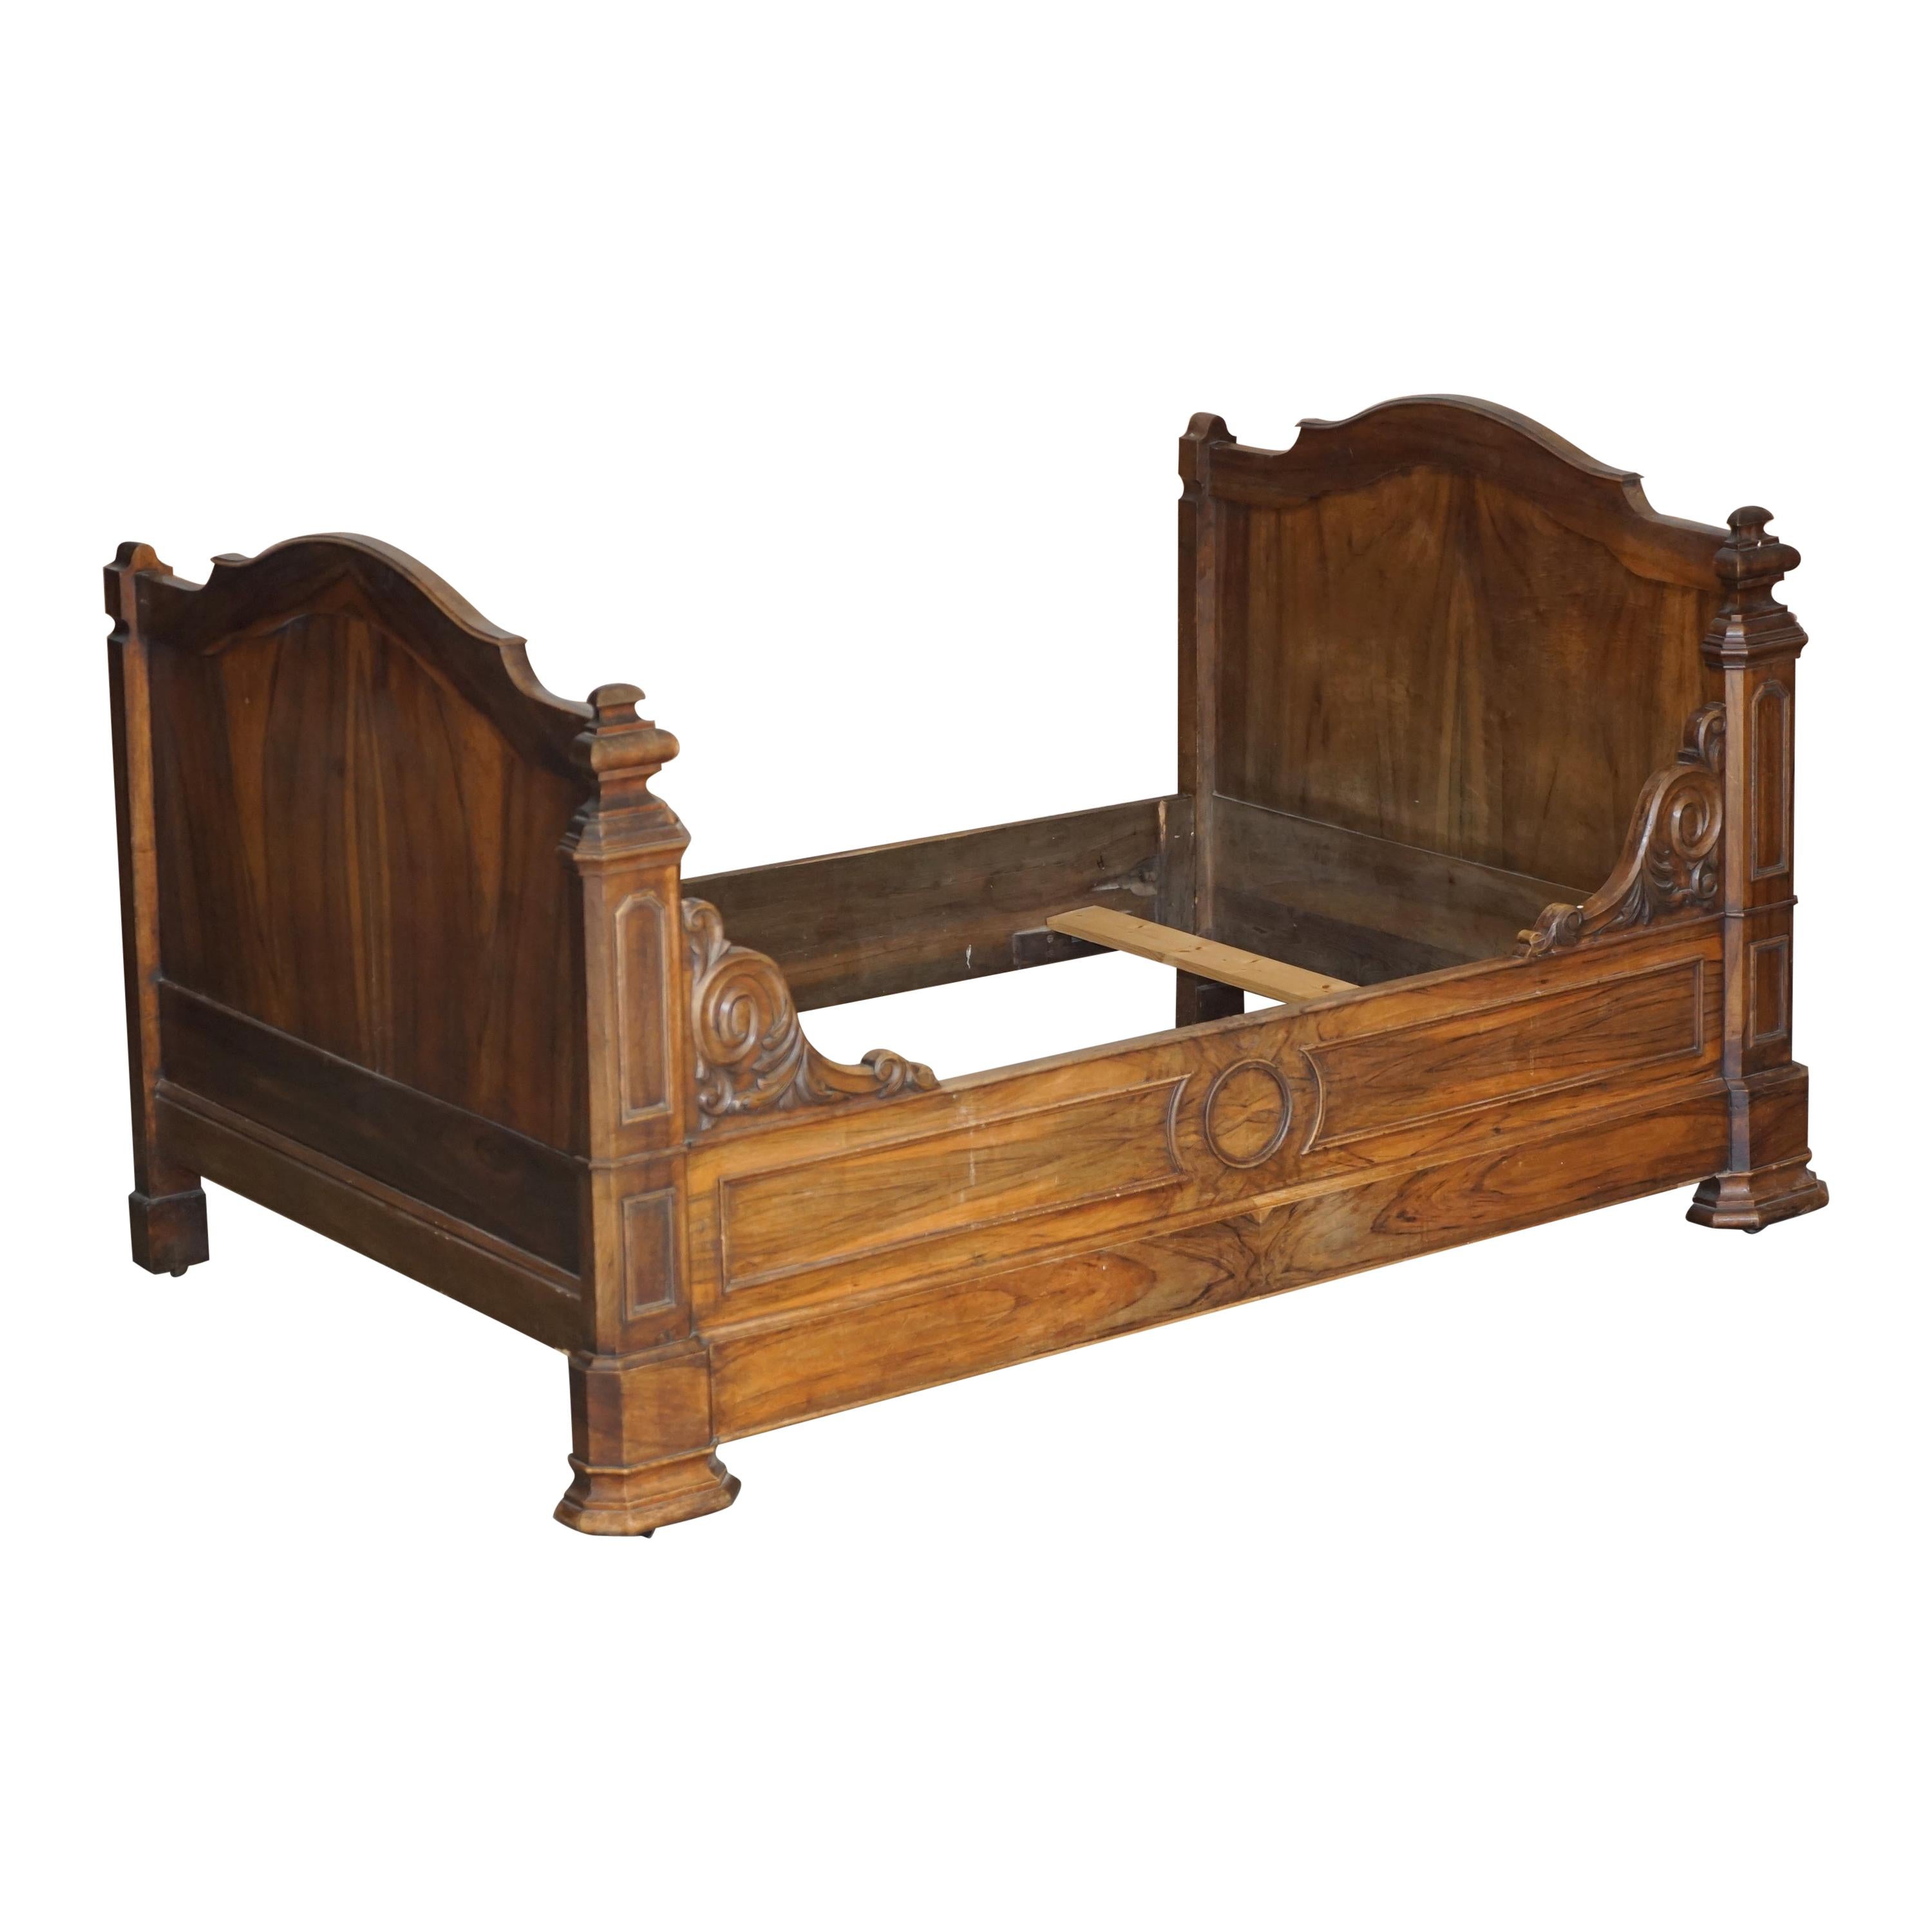 Very Rare Antique circa 1835 Hardwood French Louis Philippe Alcove Daybed Frame